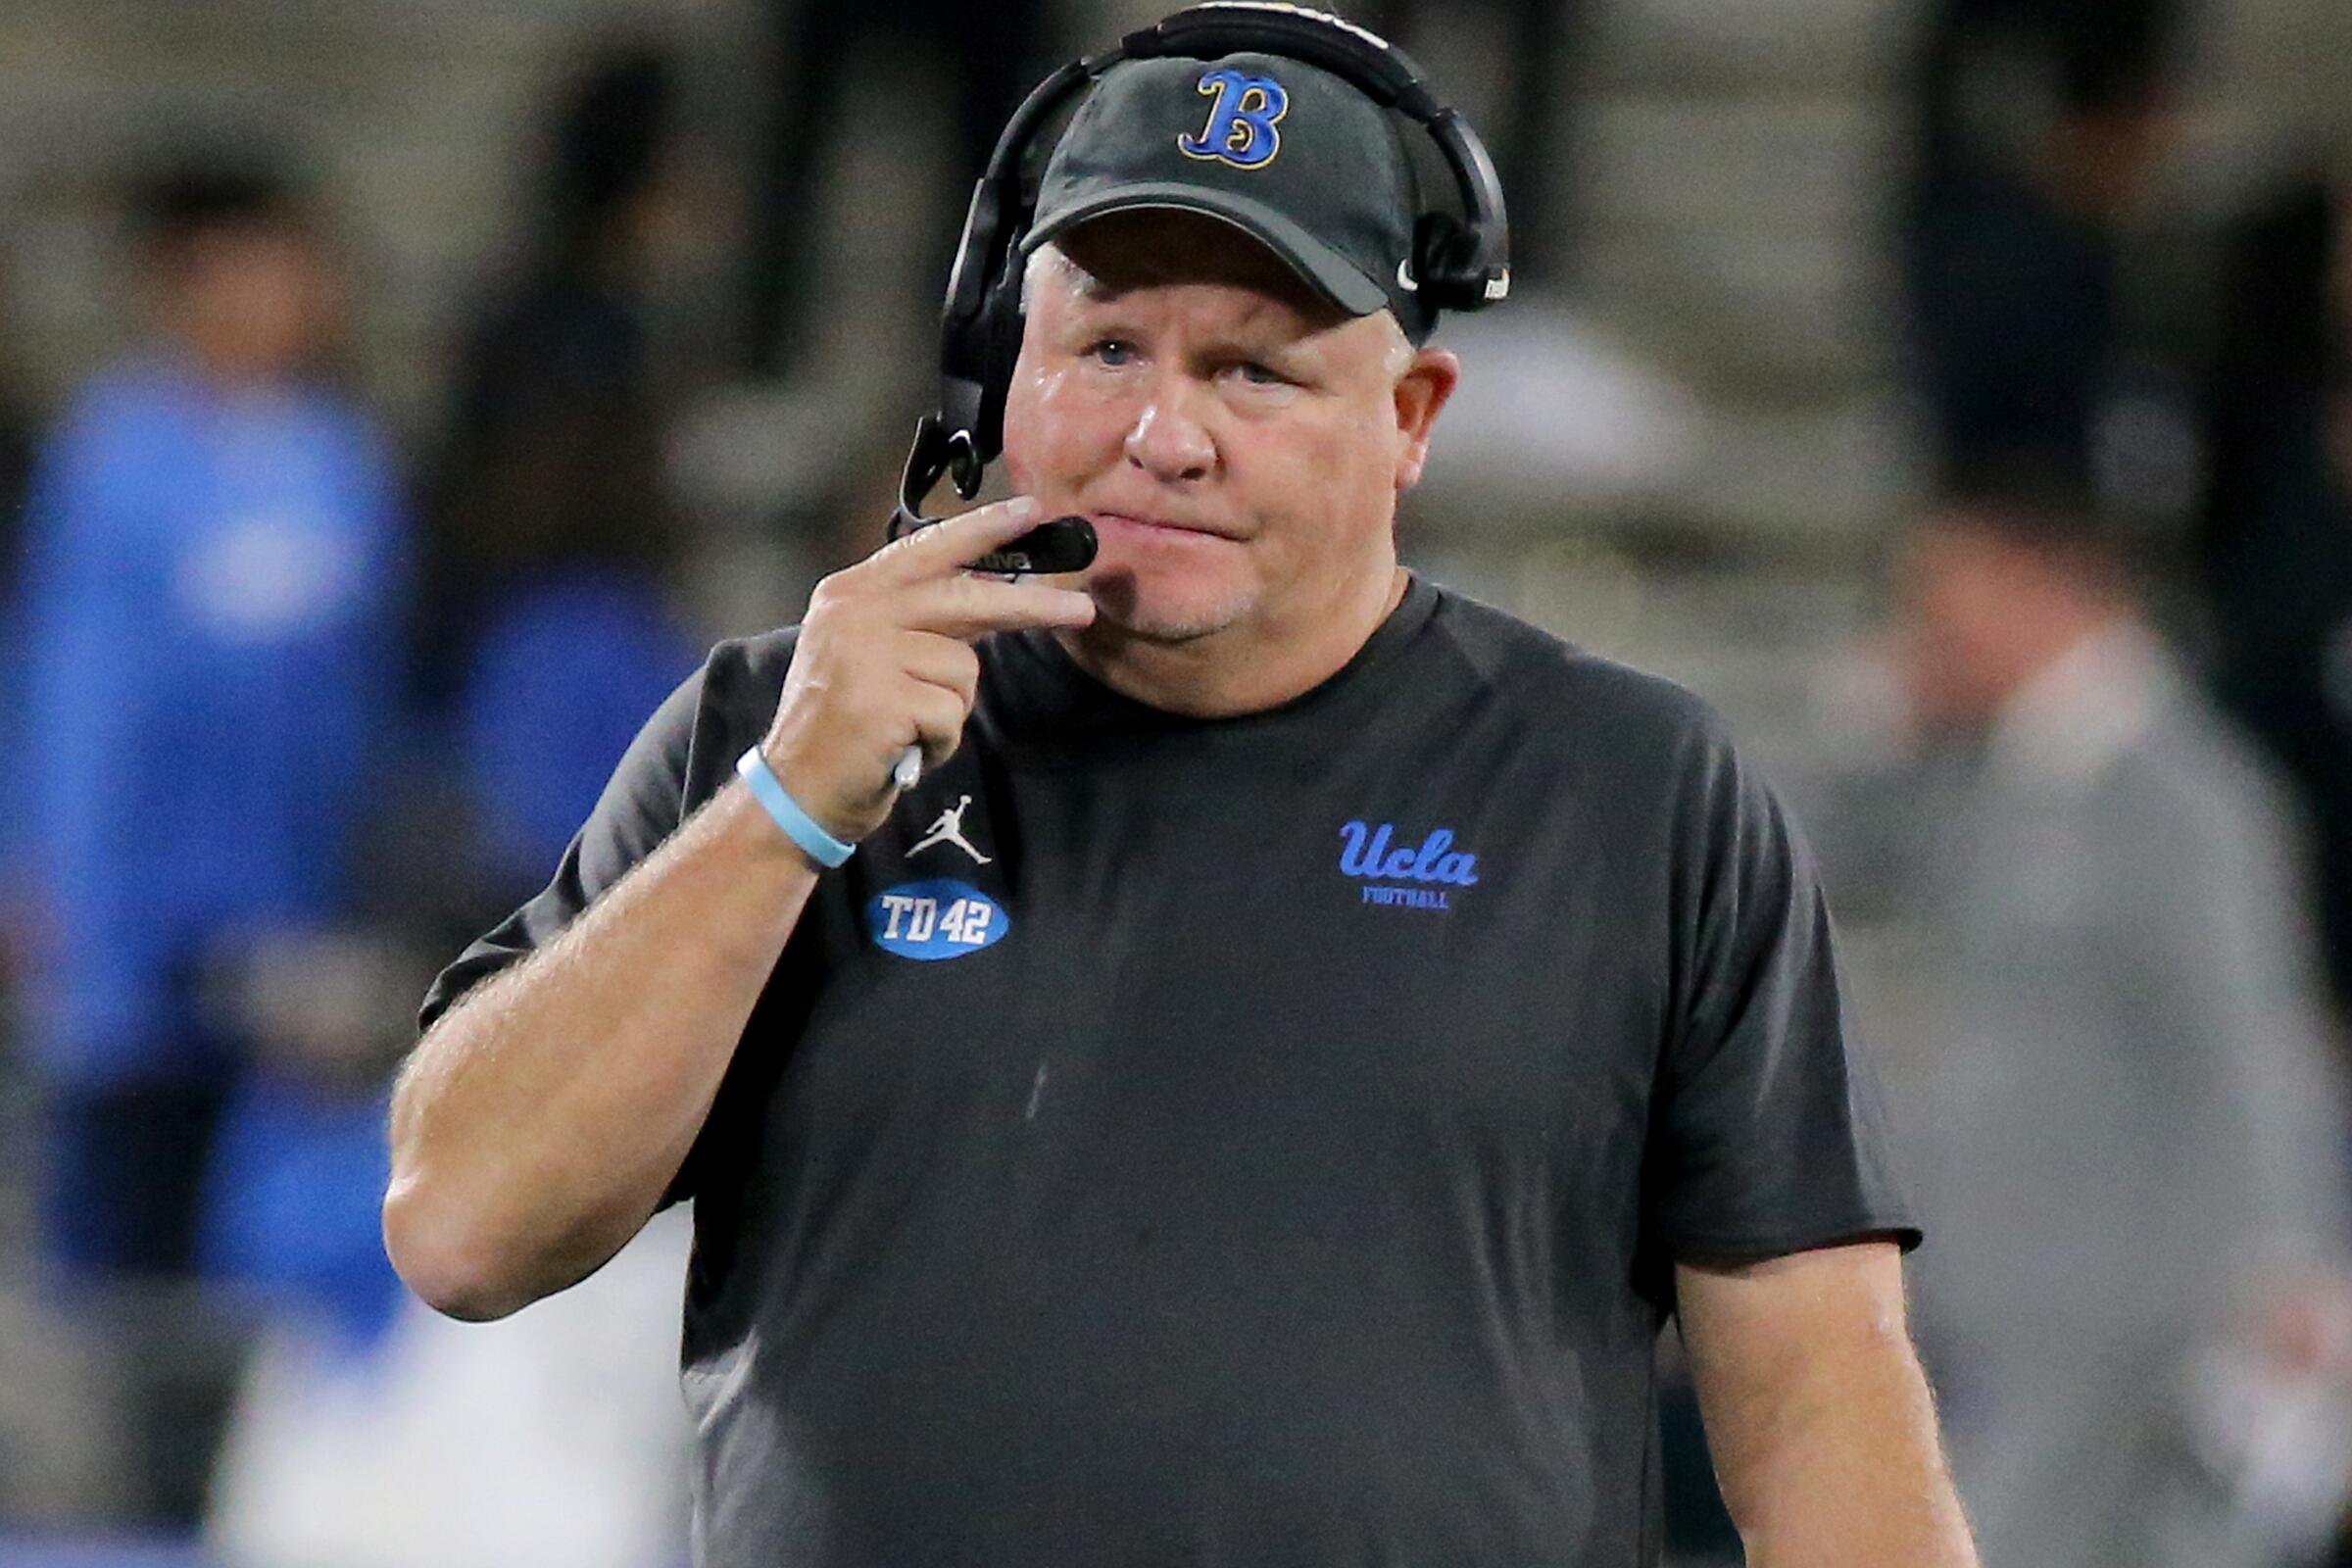 UCLA head coach Chip Kelly talks on his headset while walking the sideline.